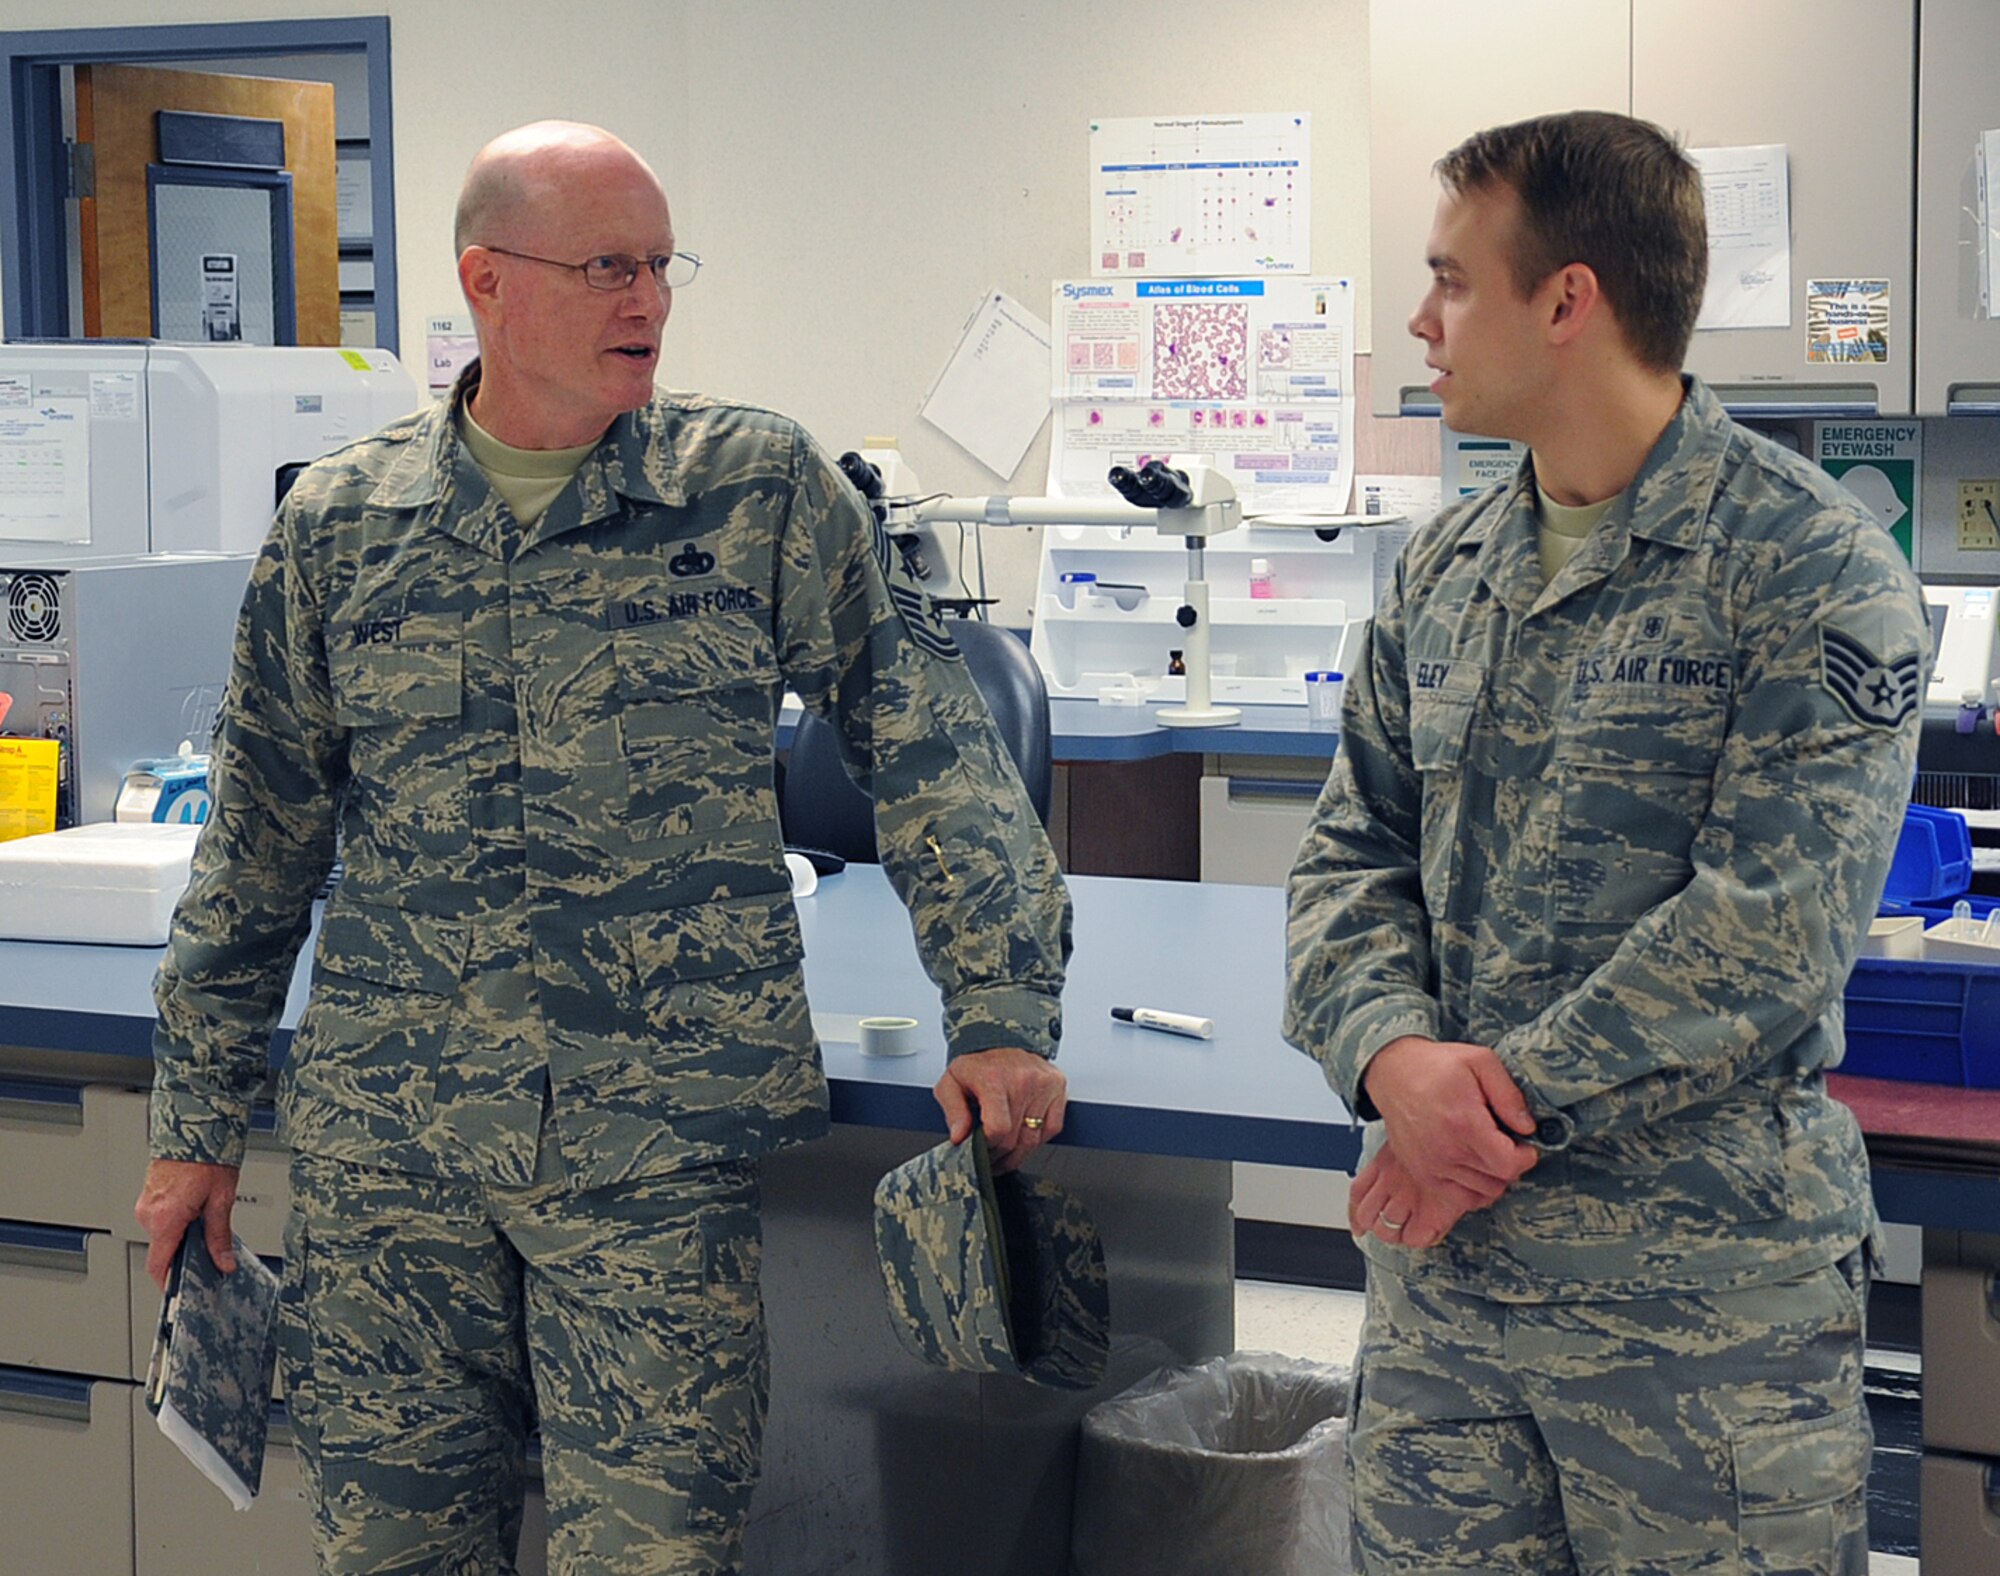 Chief Master Sgt. Terry West, 8th Air Force command chief, speaks with Staff Sgt. David Eley, 2nd Medical Support Squadron laboratory technician, during his visit to the 2nd Medical Group on Barksdale Air Force Base, La., Aug. 20, 2013. The mission of the 2nd MDSS laboratory is to provide laboratory support to the medical staff of the 2nd Medical Group through accurate and timely results obtained by the scientific application of accepted analytical principles. (U.S. Air Force photo/Senior Airman Sean Martin)